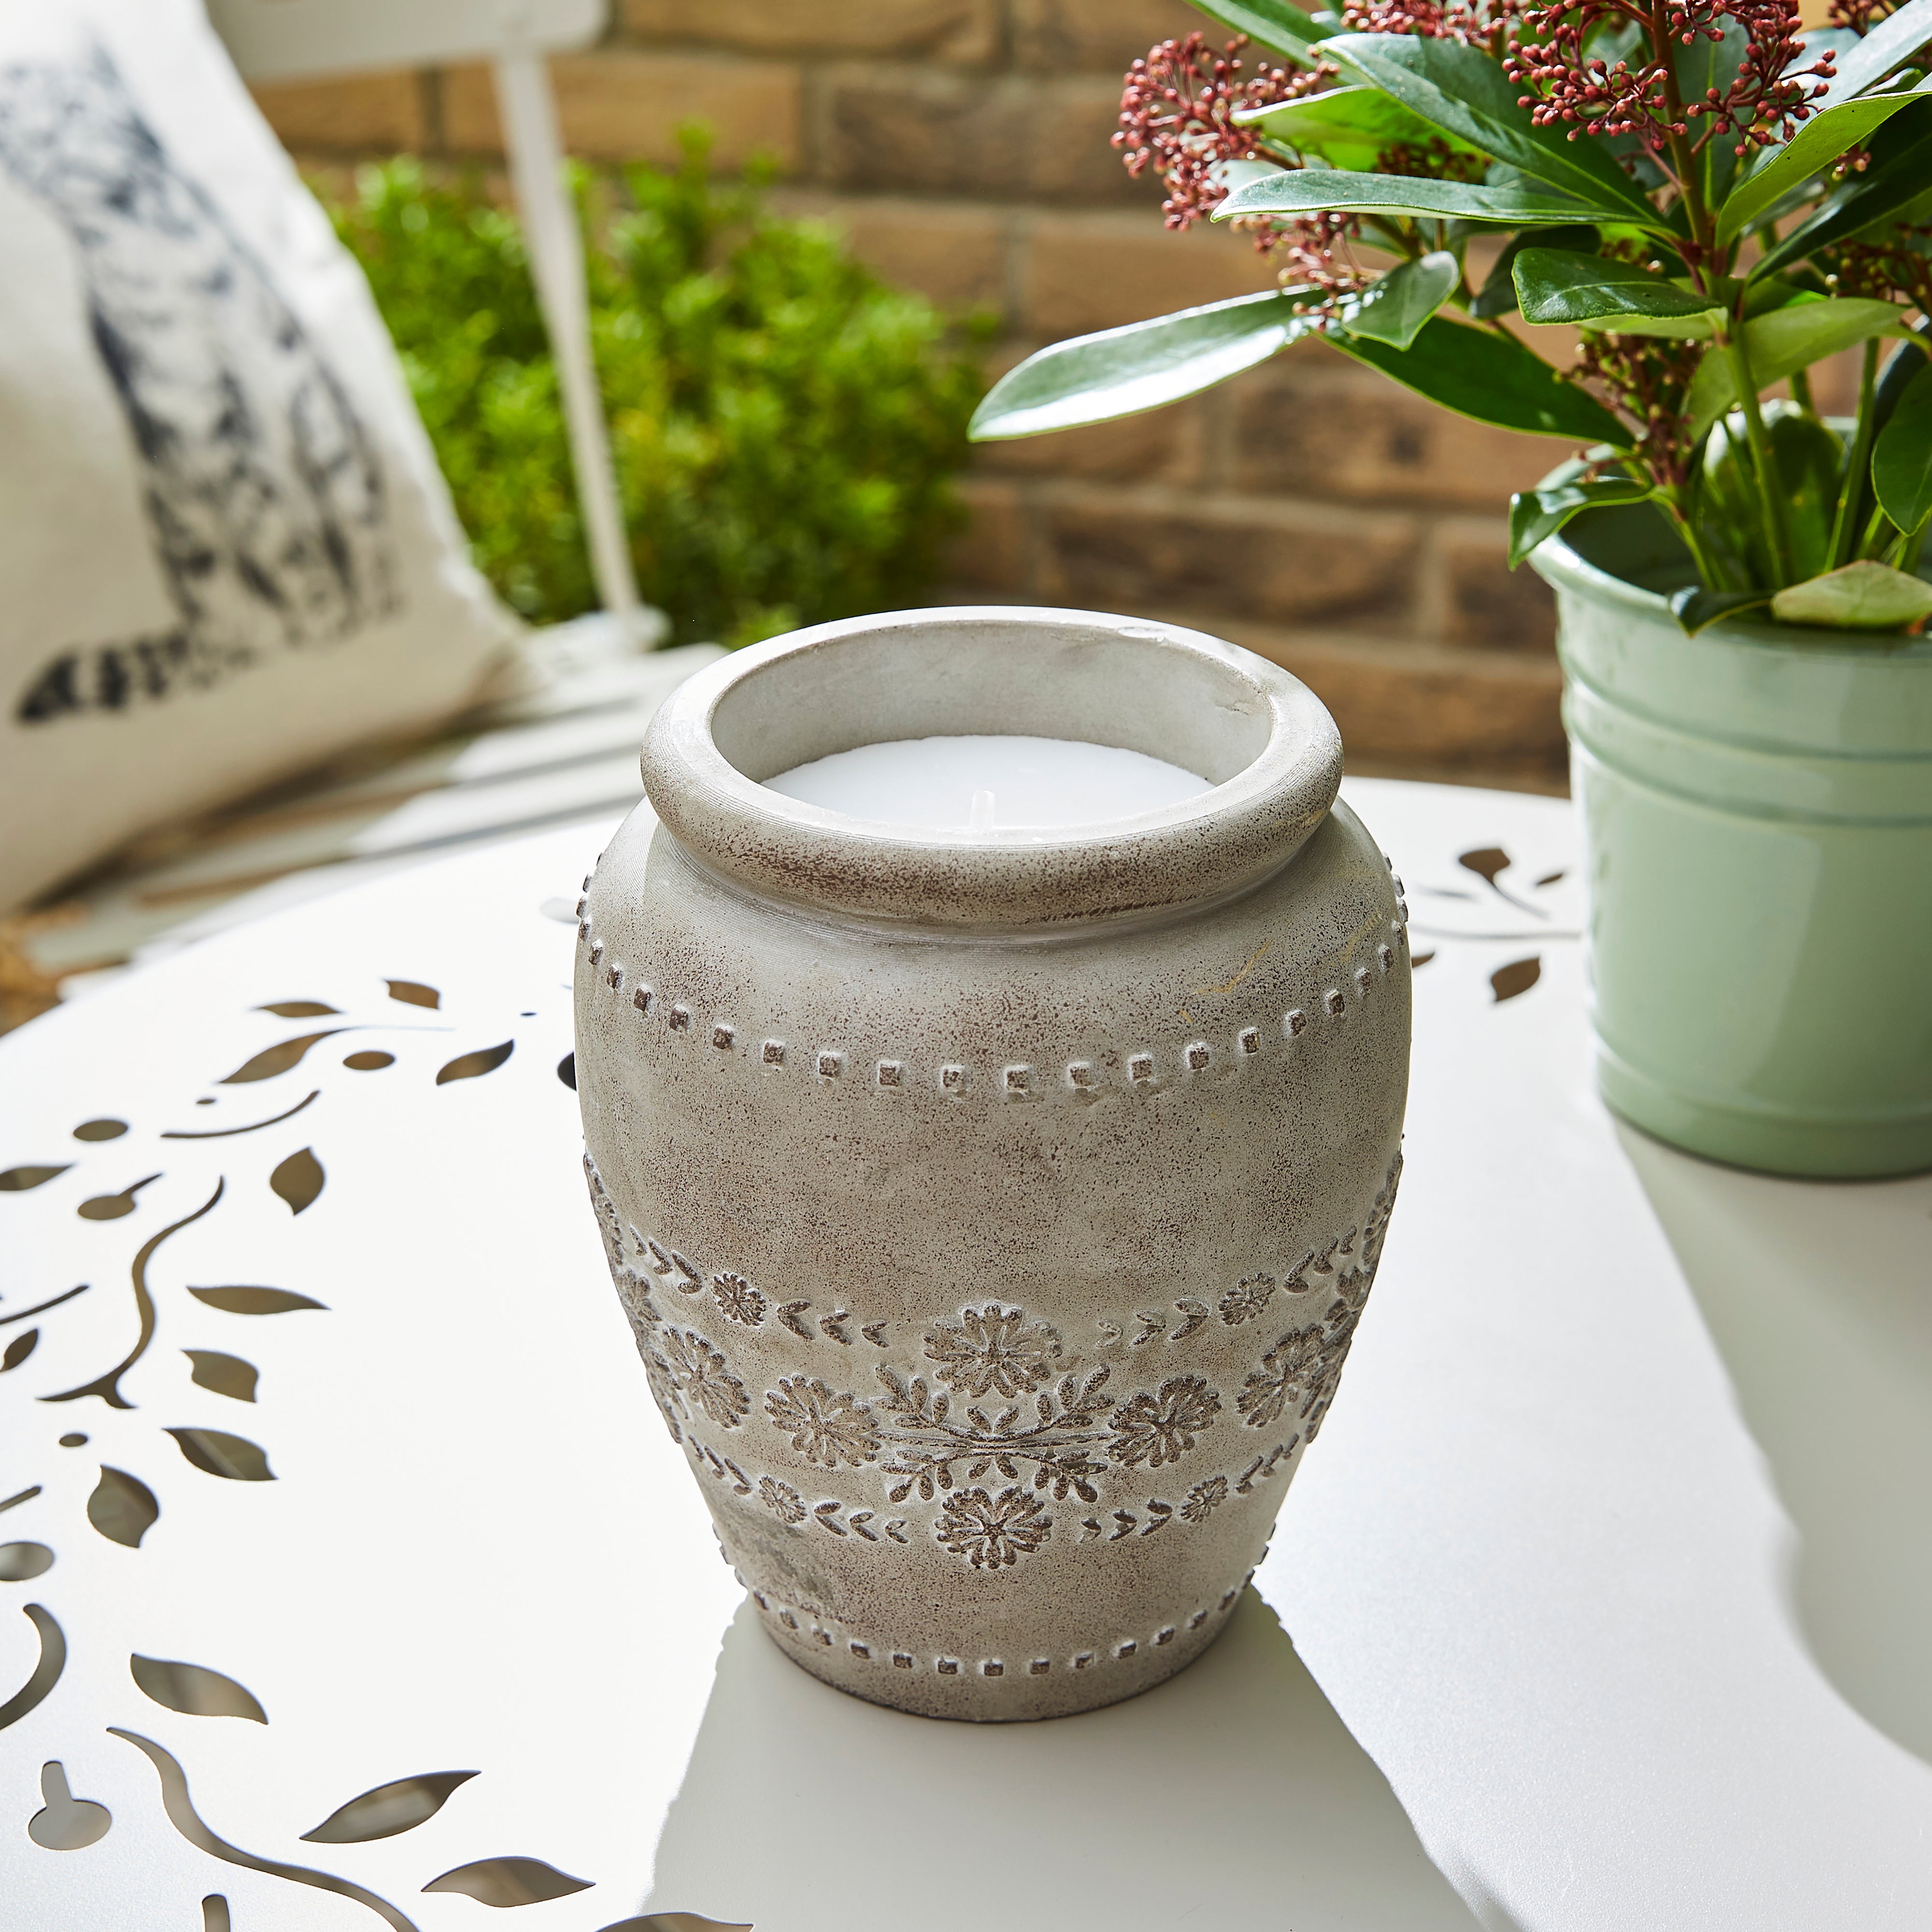 Floral Citronella and Eucalyptus Oil Urn Candle